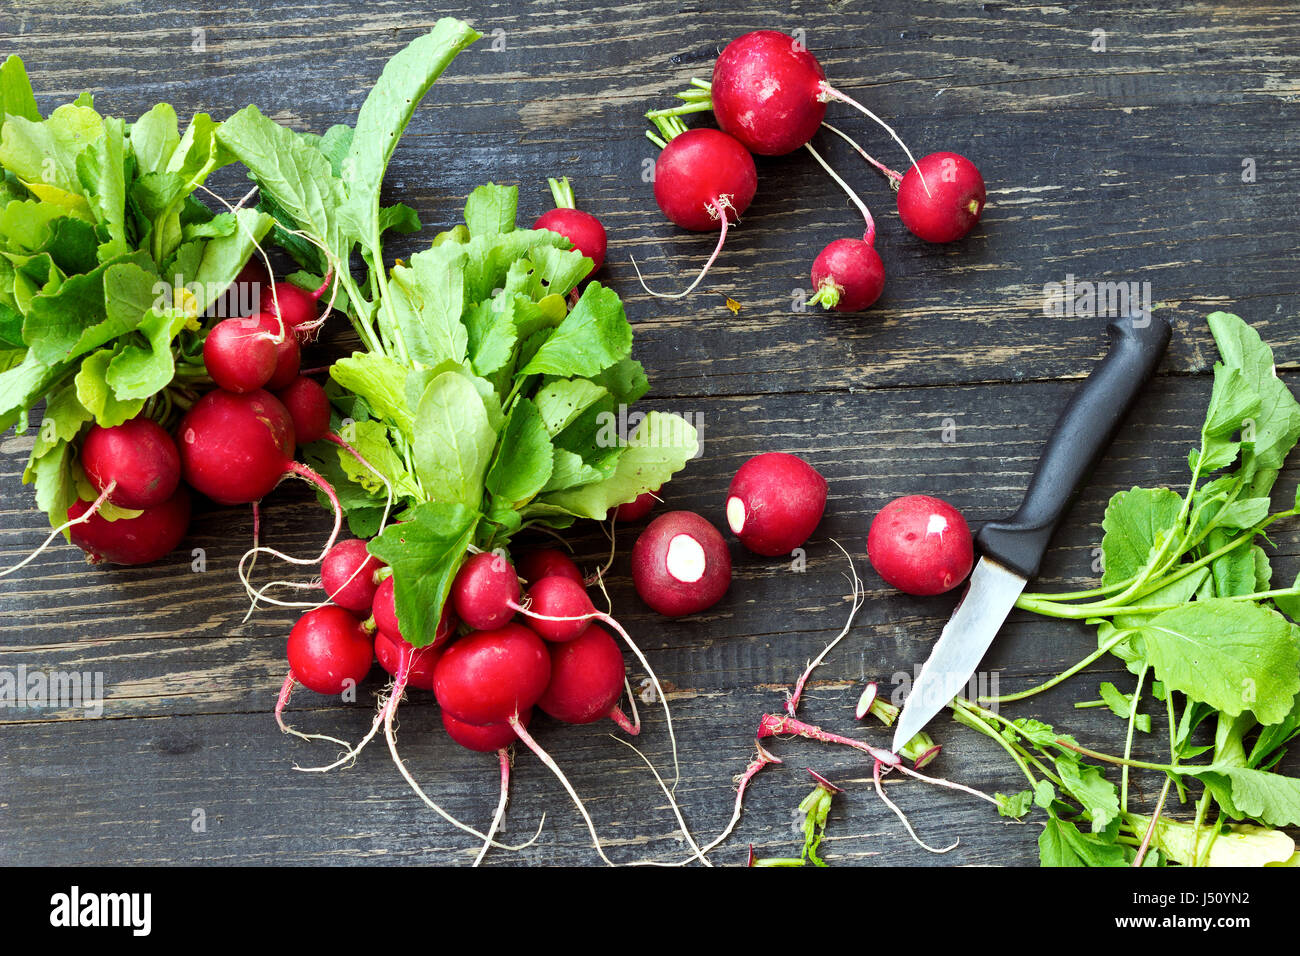 Organic grown red radishes -prepares for food Stock Photo